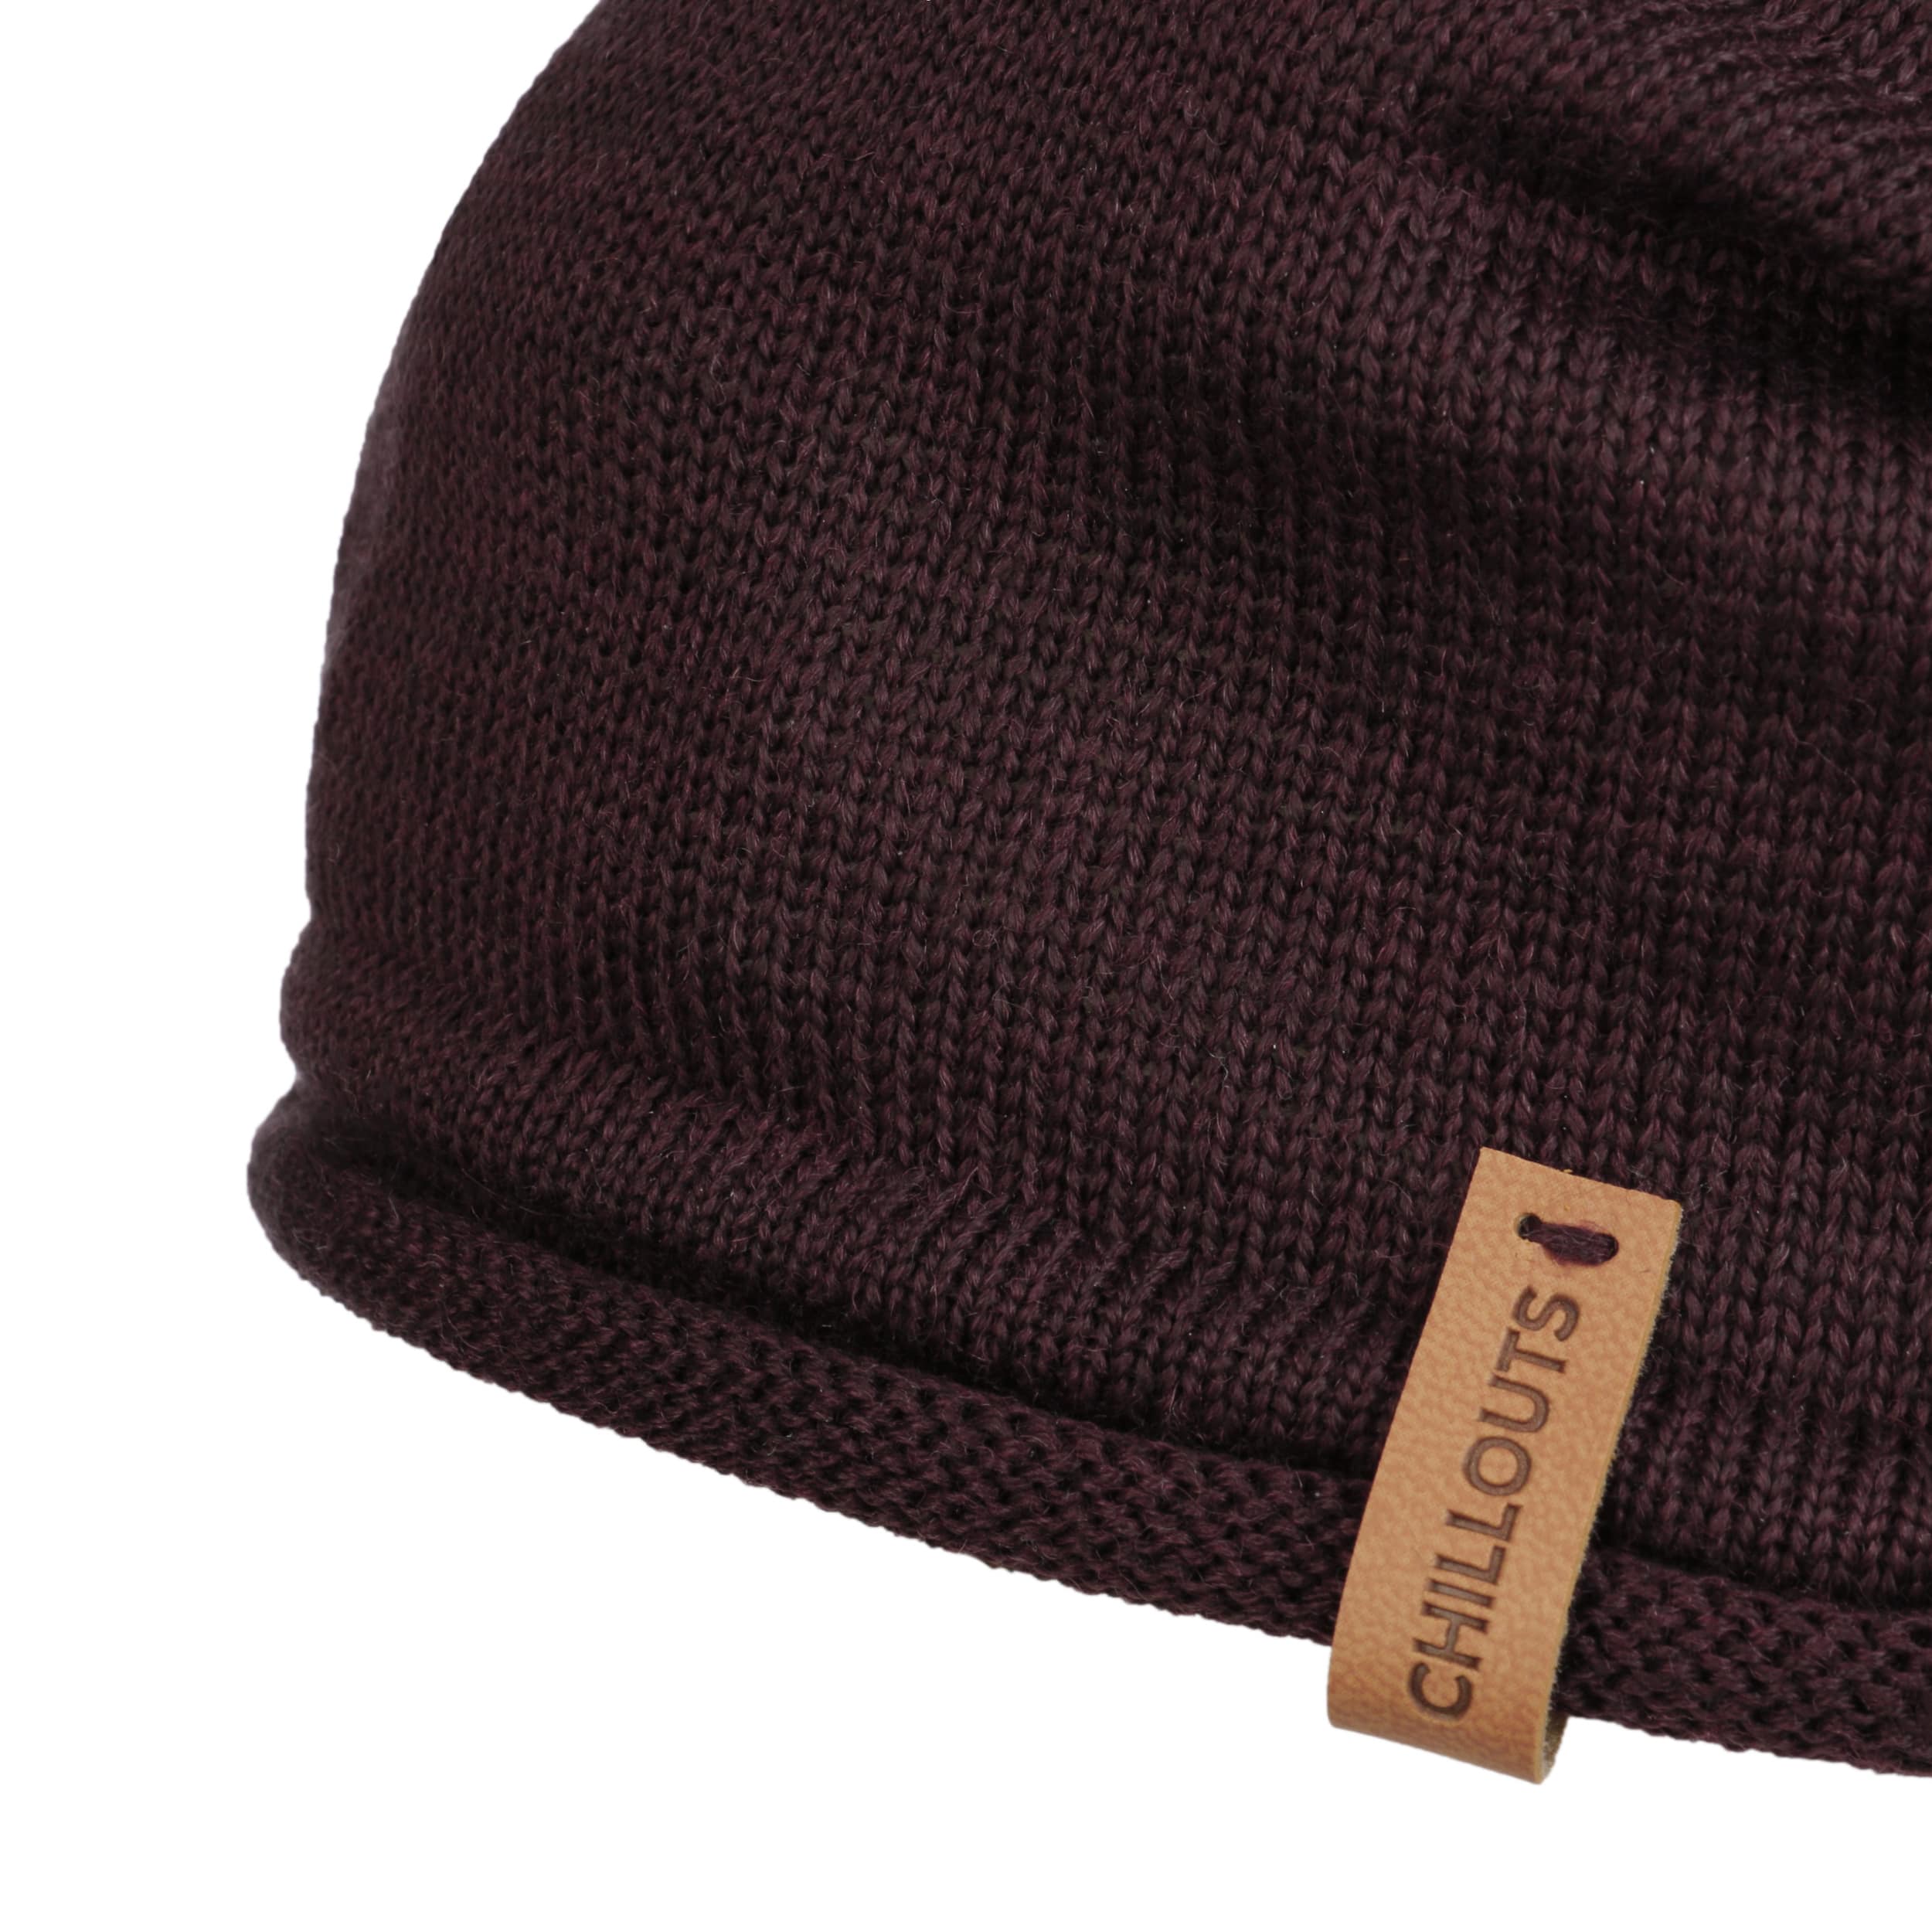 Berretto Beanie Leicester - Chillouts by 27,99 €